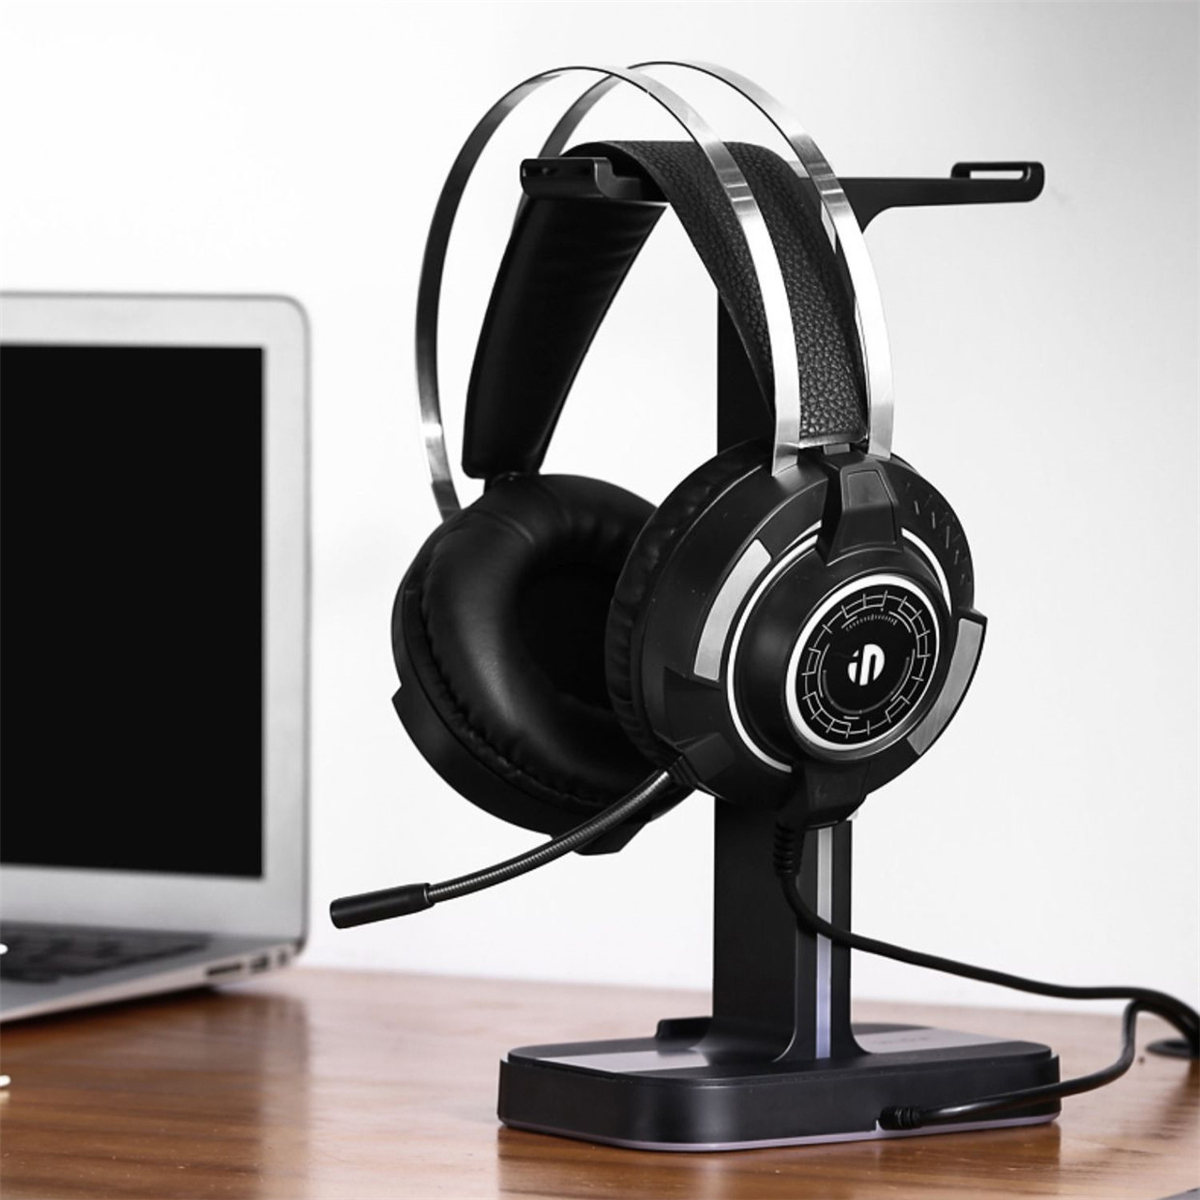 Inphic-H100-Headset-Stand-Dual-USB-Ports-Colorful-Light-Base-Headphone-Hanger-Headset-Mount-Holder-O-1742022-4